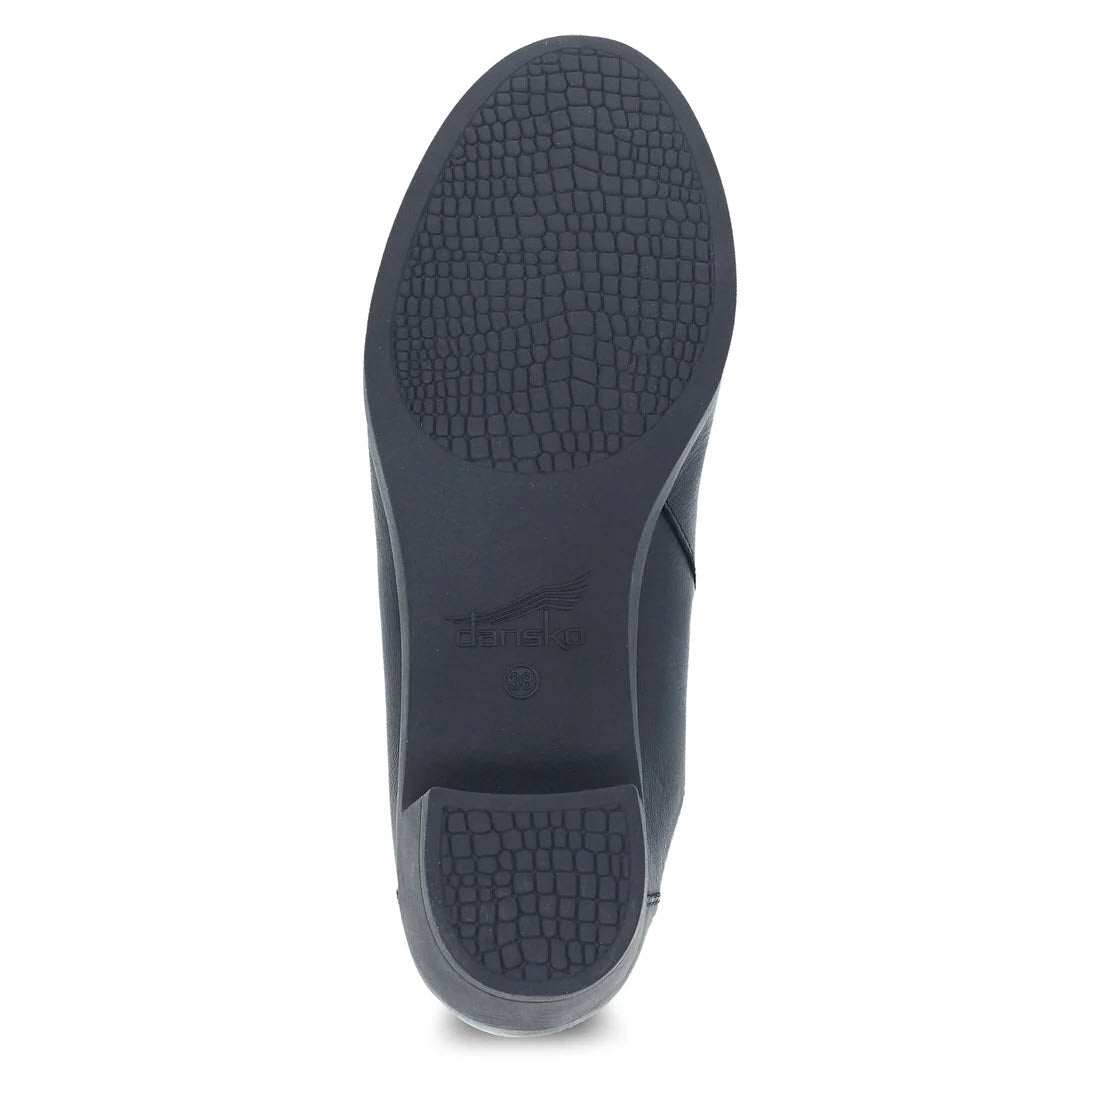 A close-up view of the sole of a Dansko Carrie Black Burnished womens backless mule with a textured pattern and embossed brand logo.